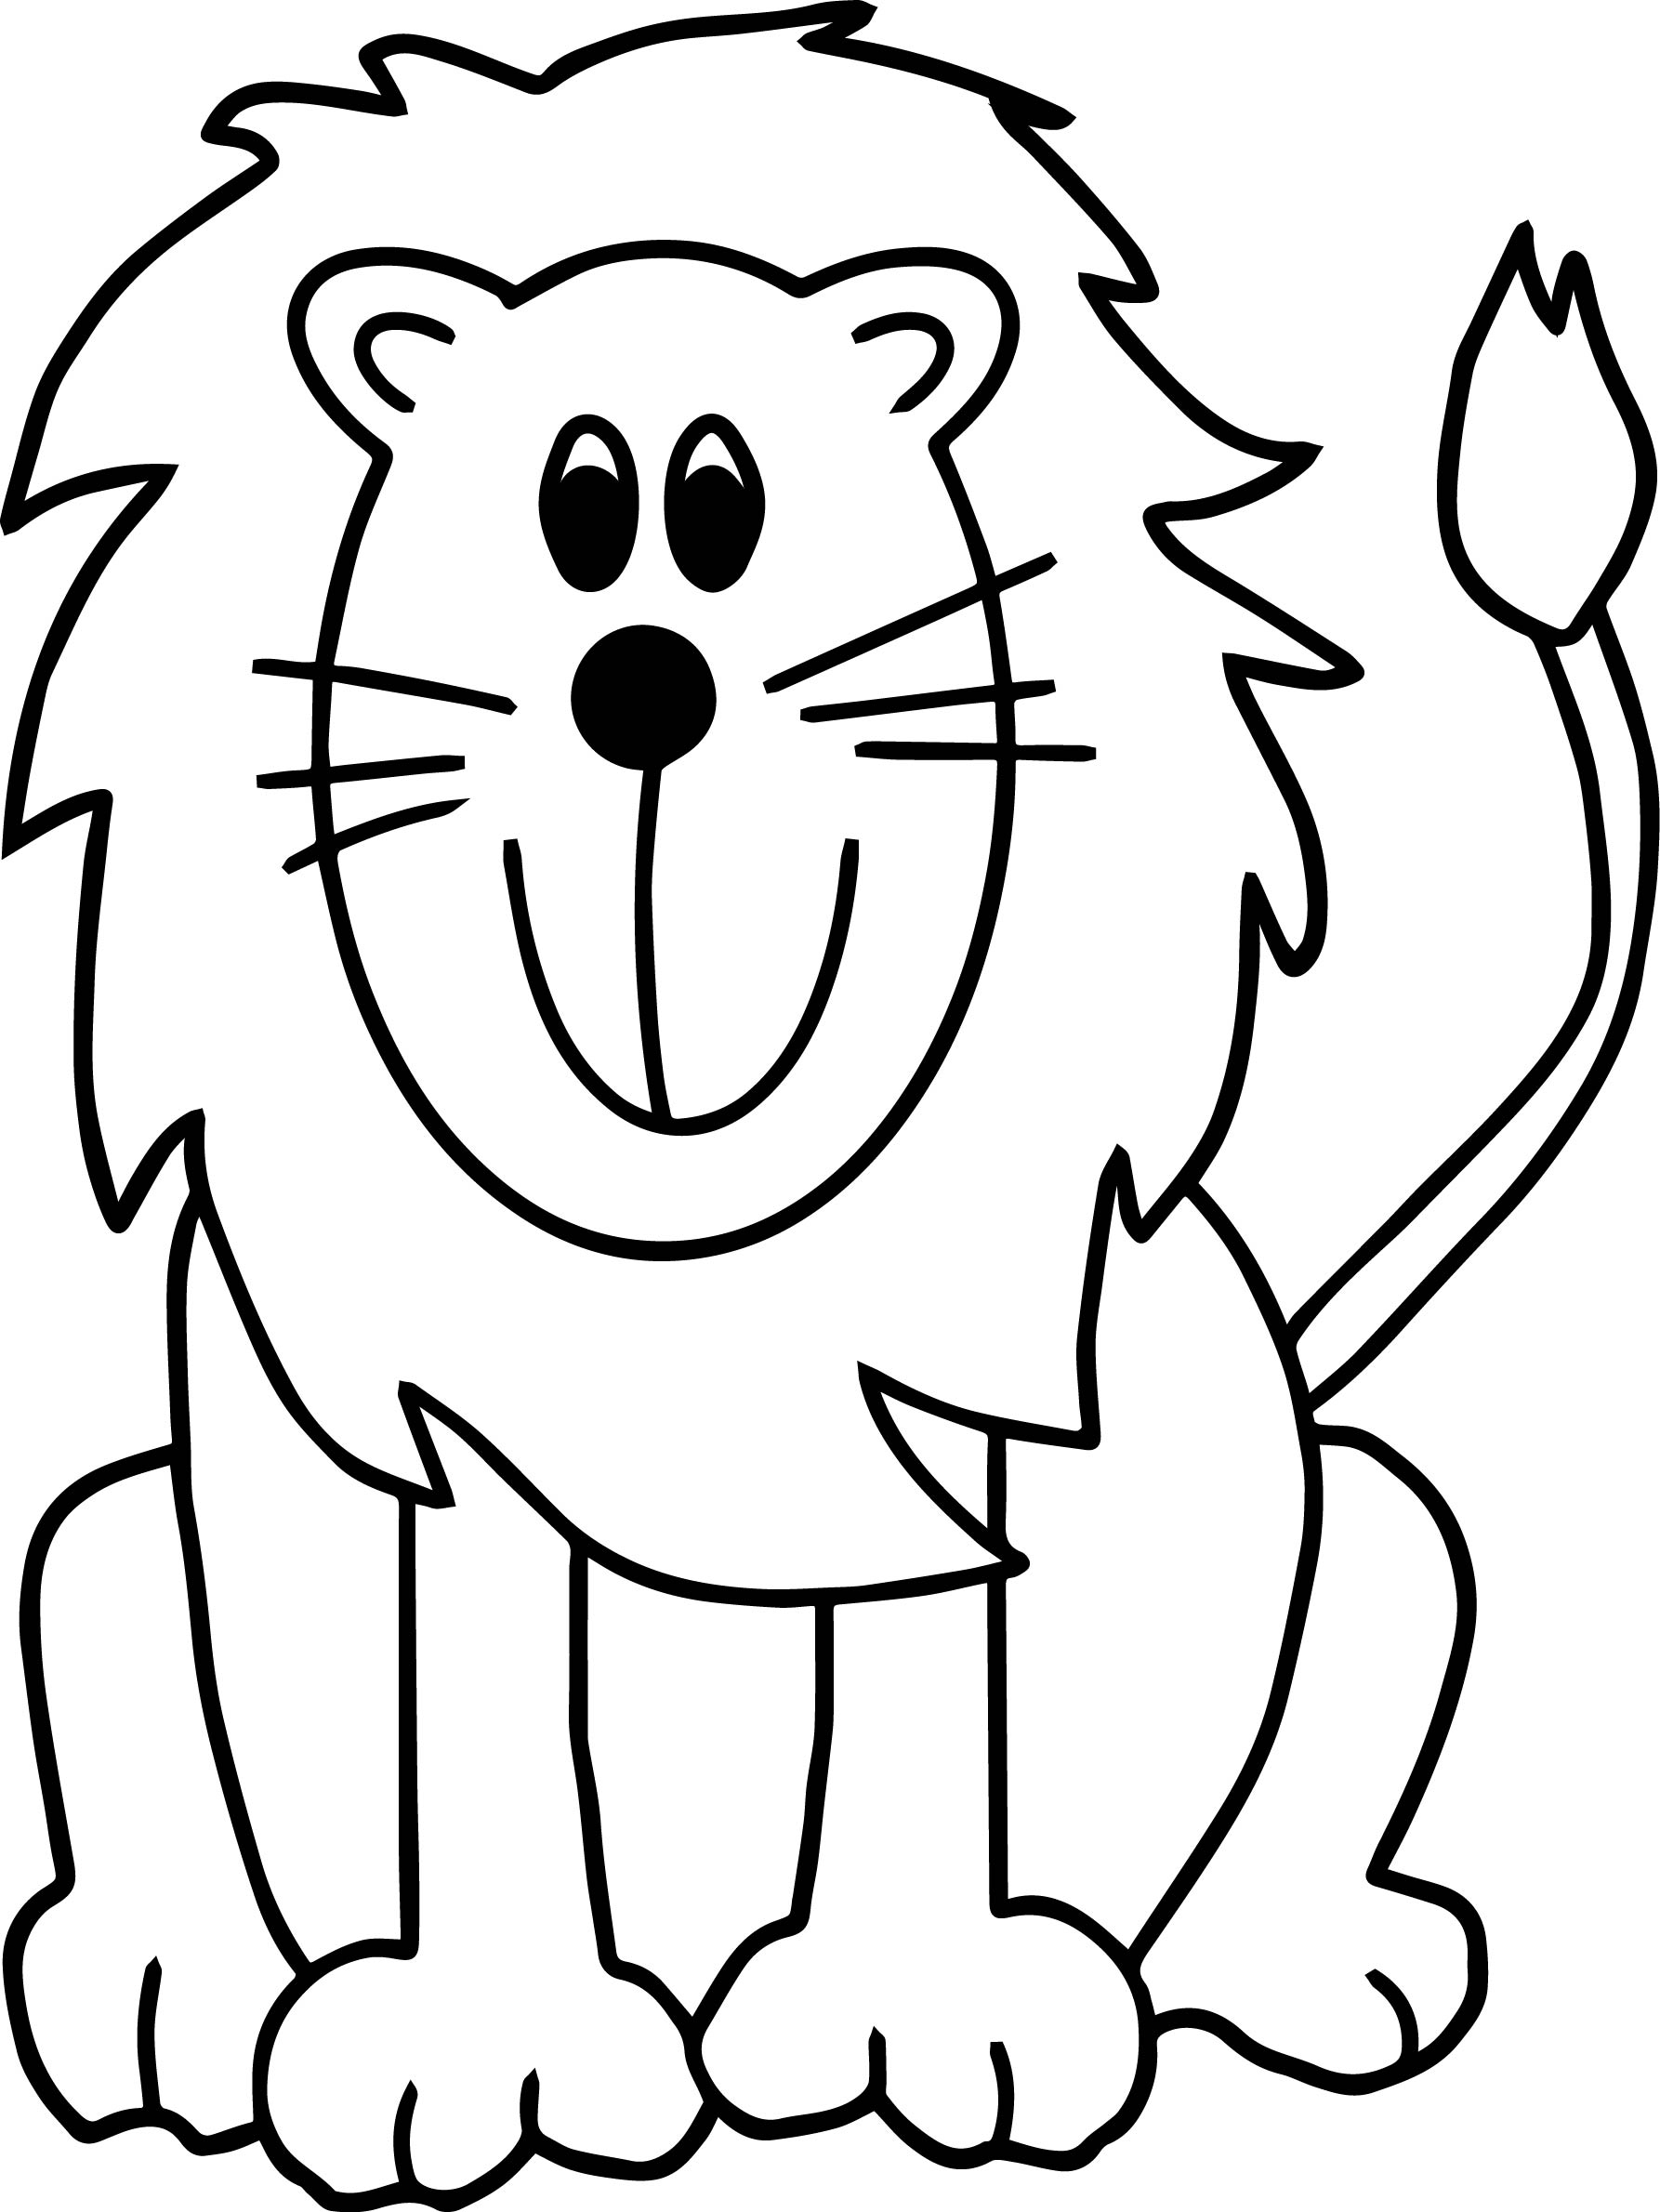 Zookeeper Coloring Page At GetColorings Free Printable Colorings 